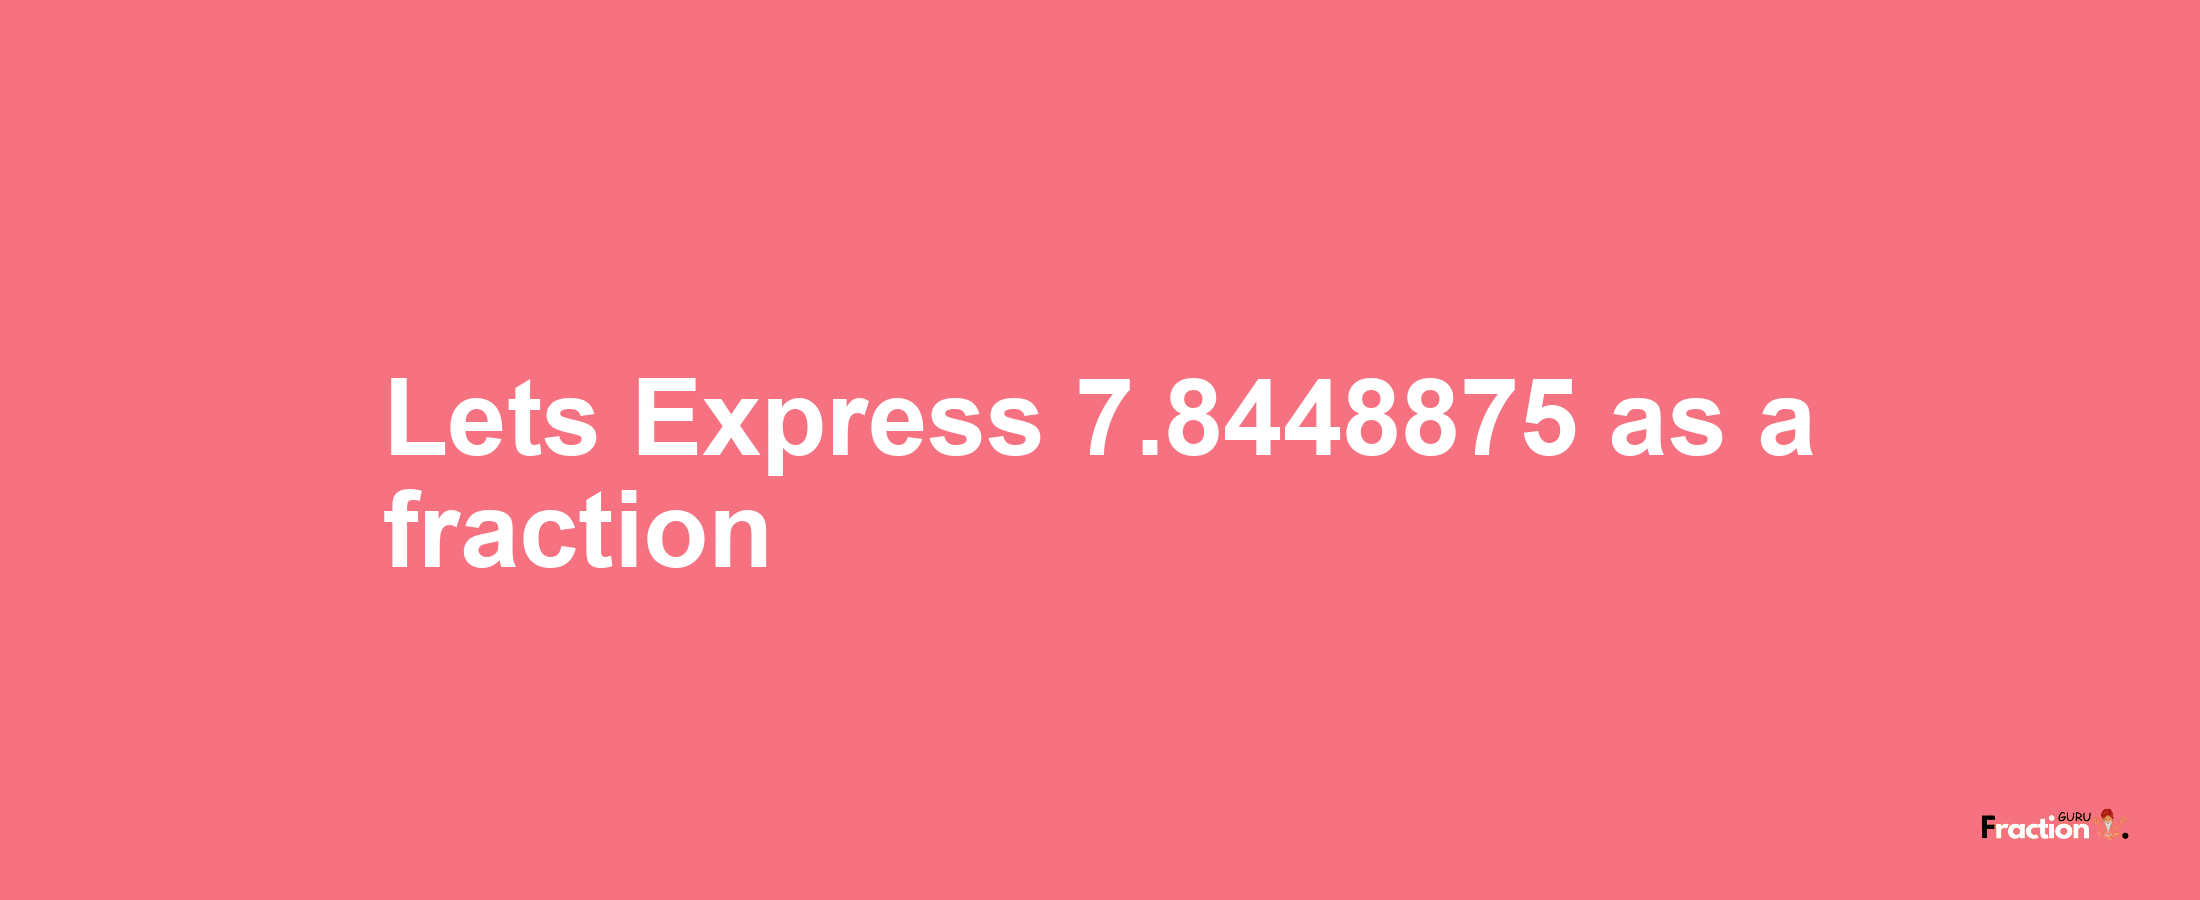 Lets Express 7.8448875 as afraction